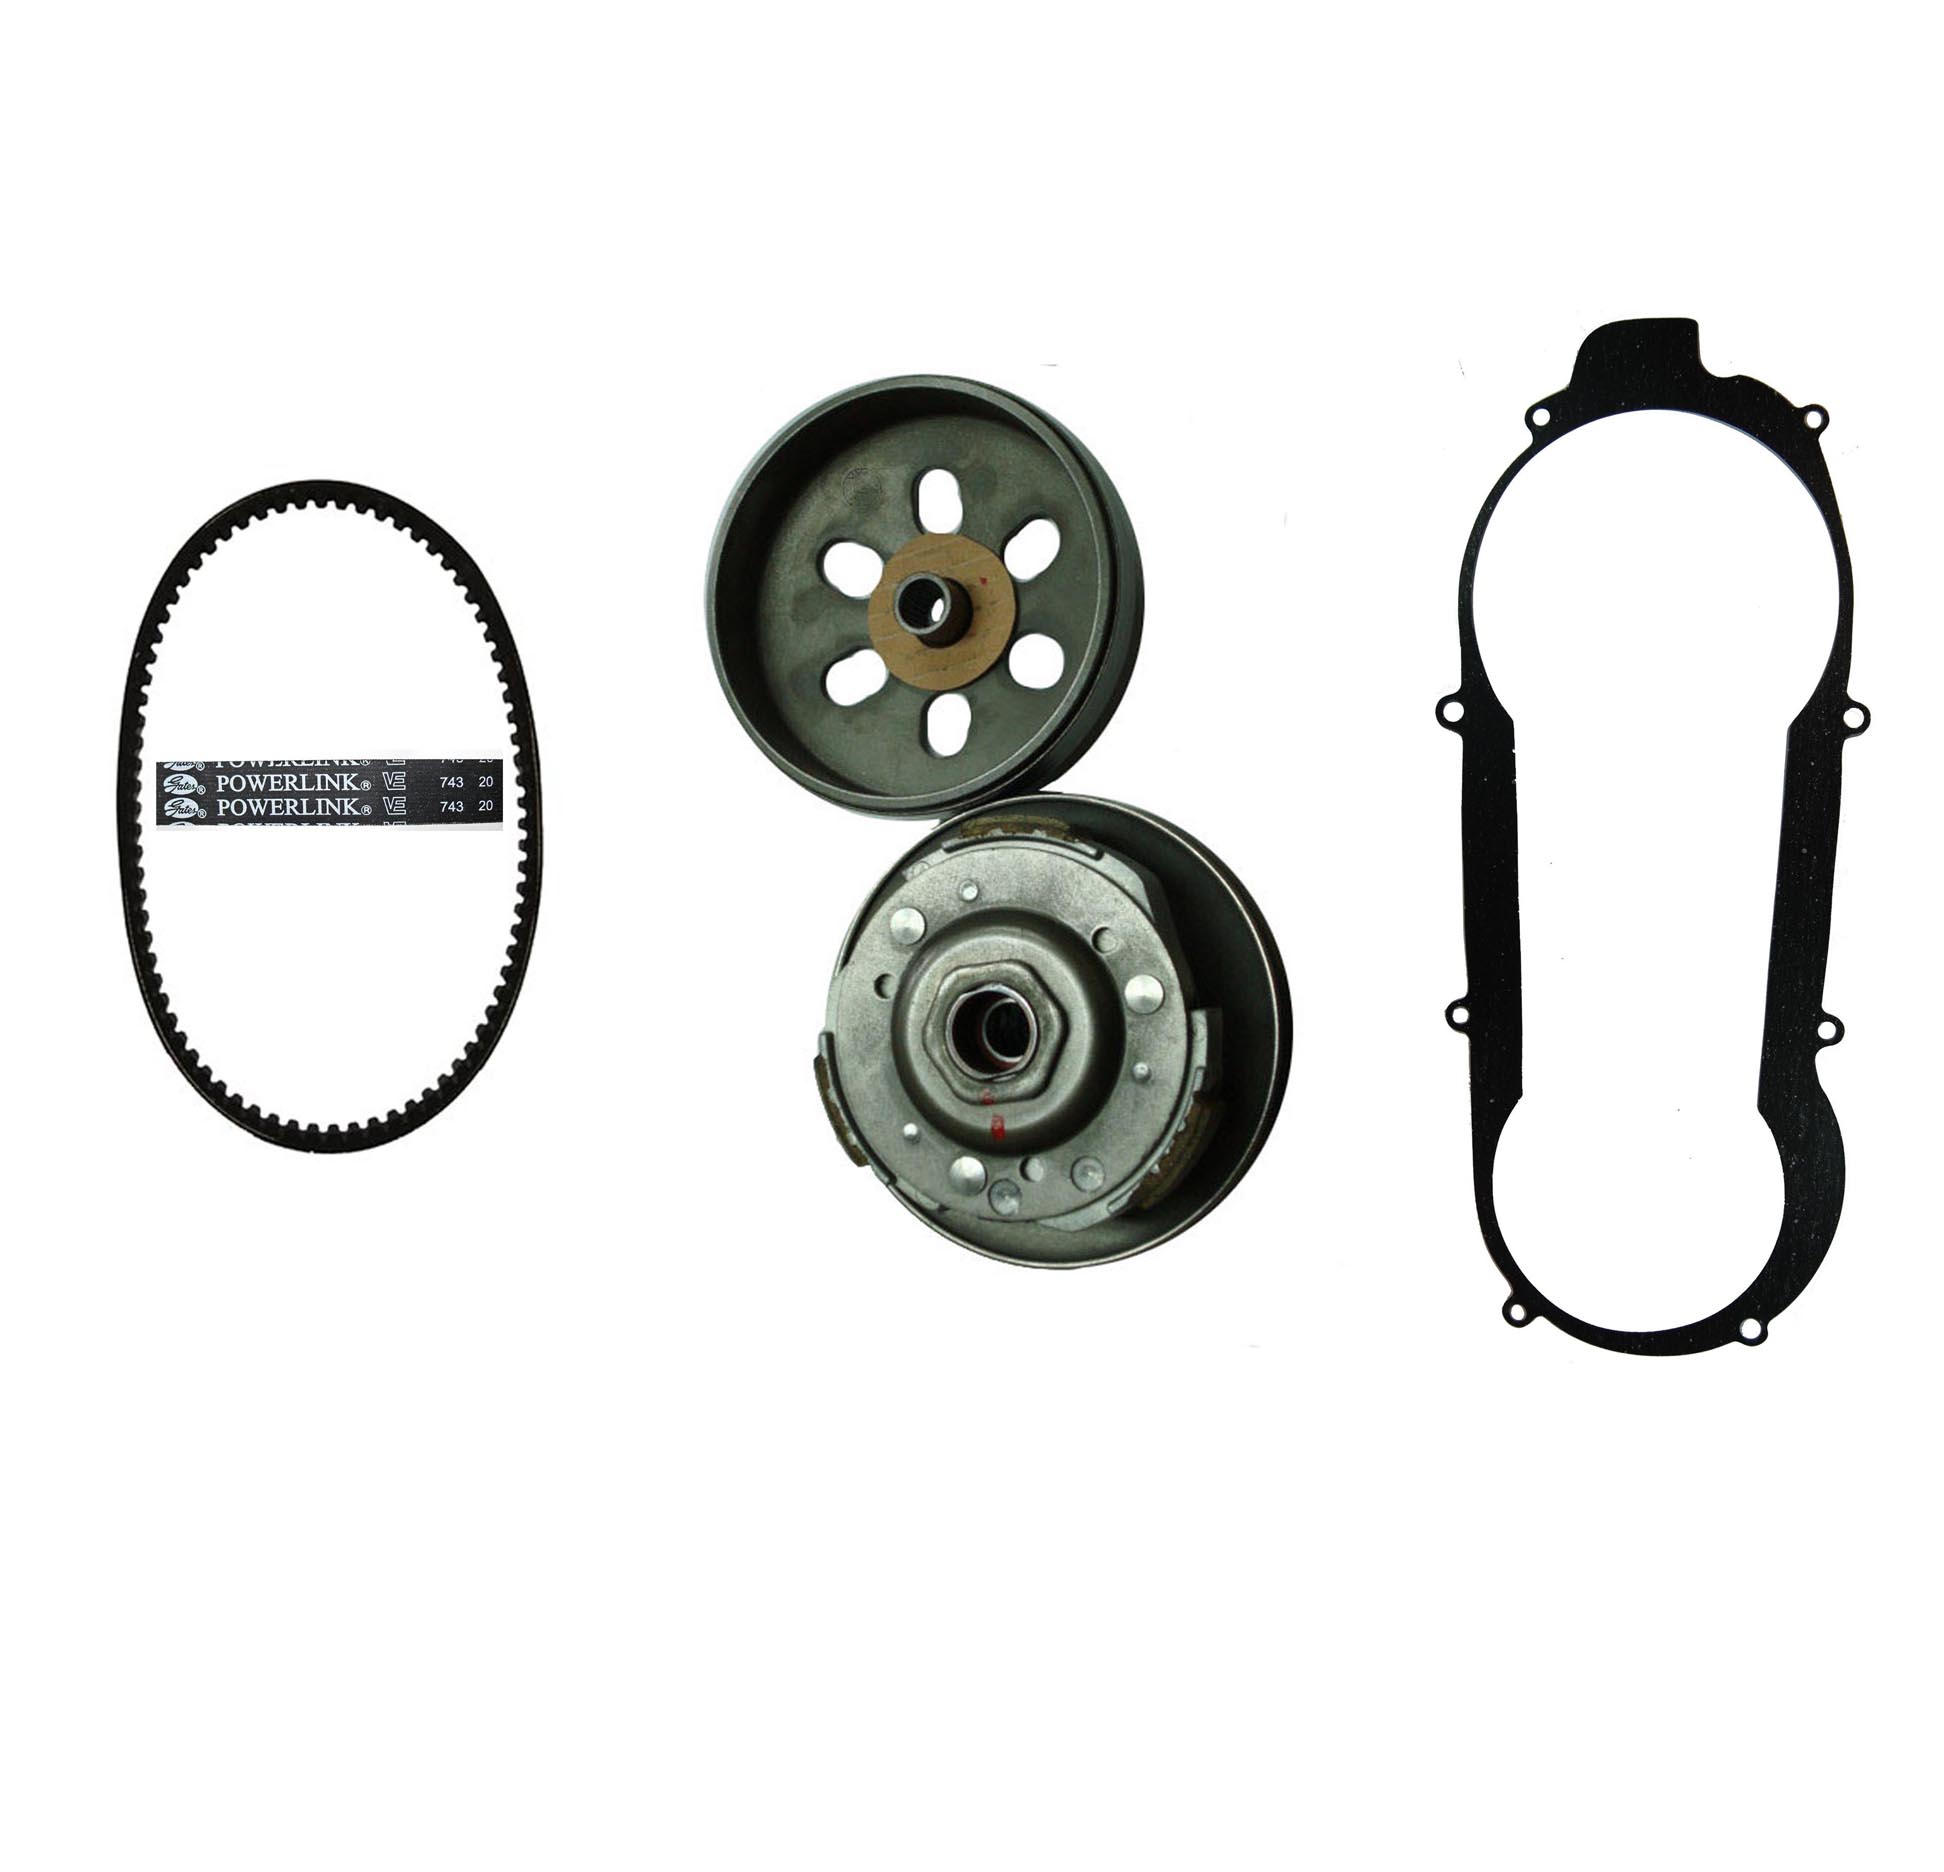 GY6-150 Rear Clutch & Powerlink Belt Kit (Short Case) For use on units with the 743x20x30 Belt